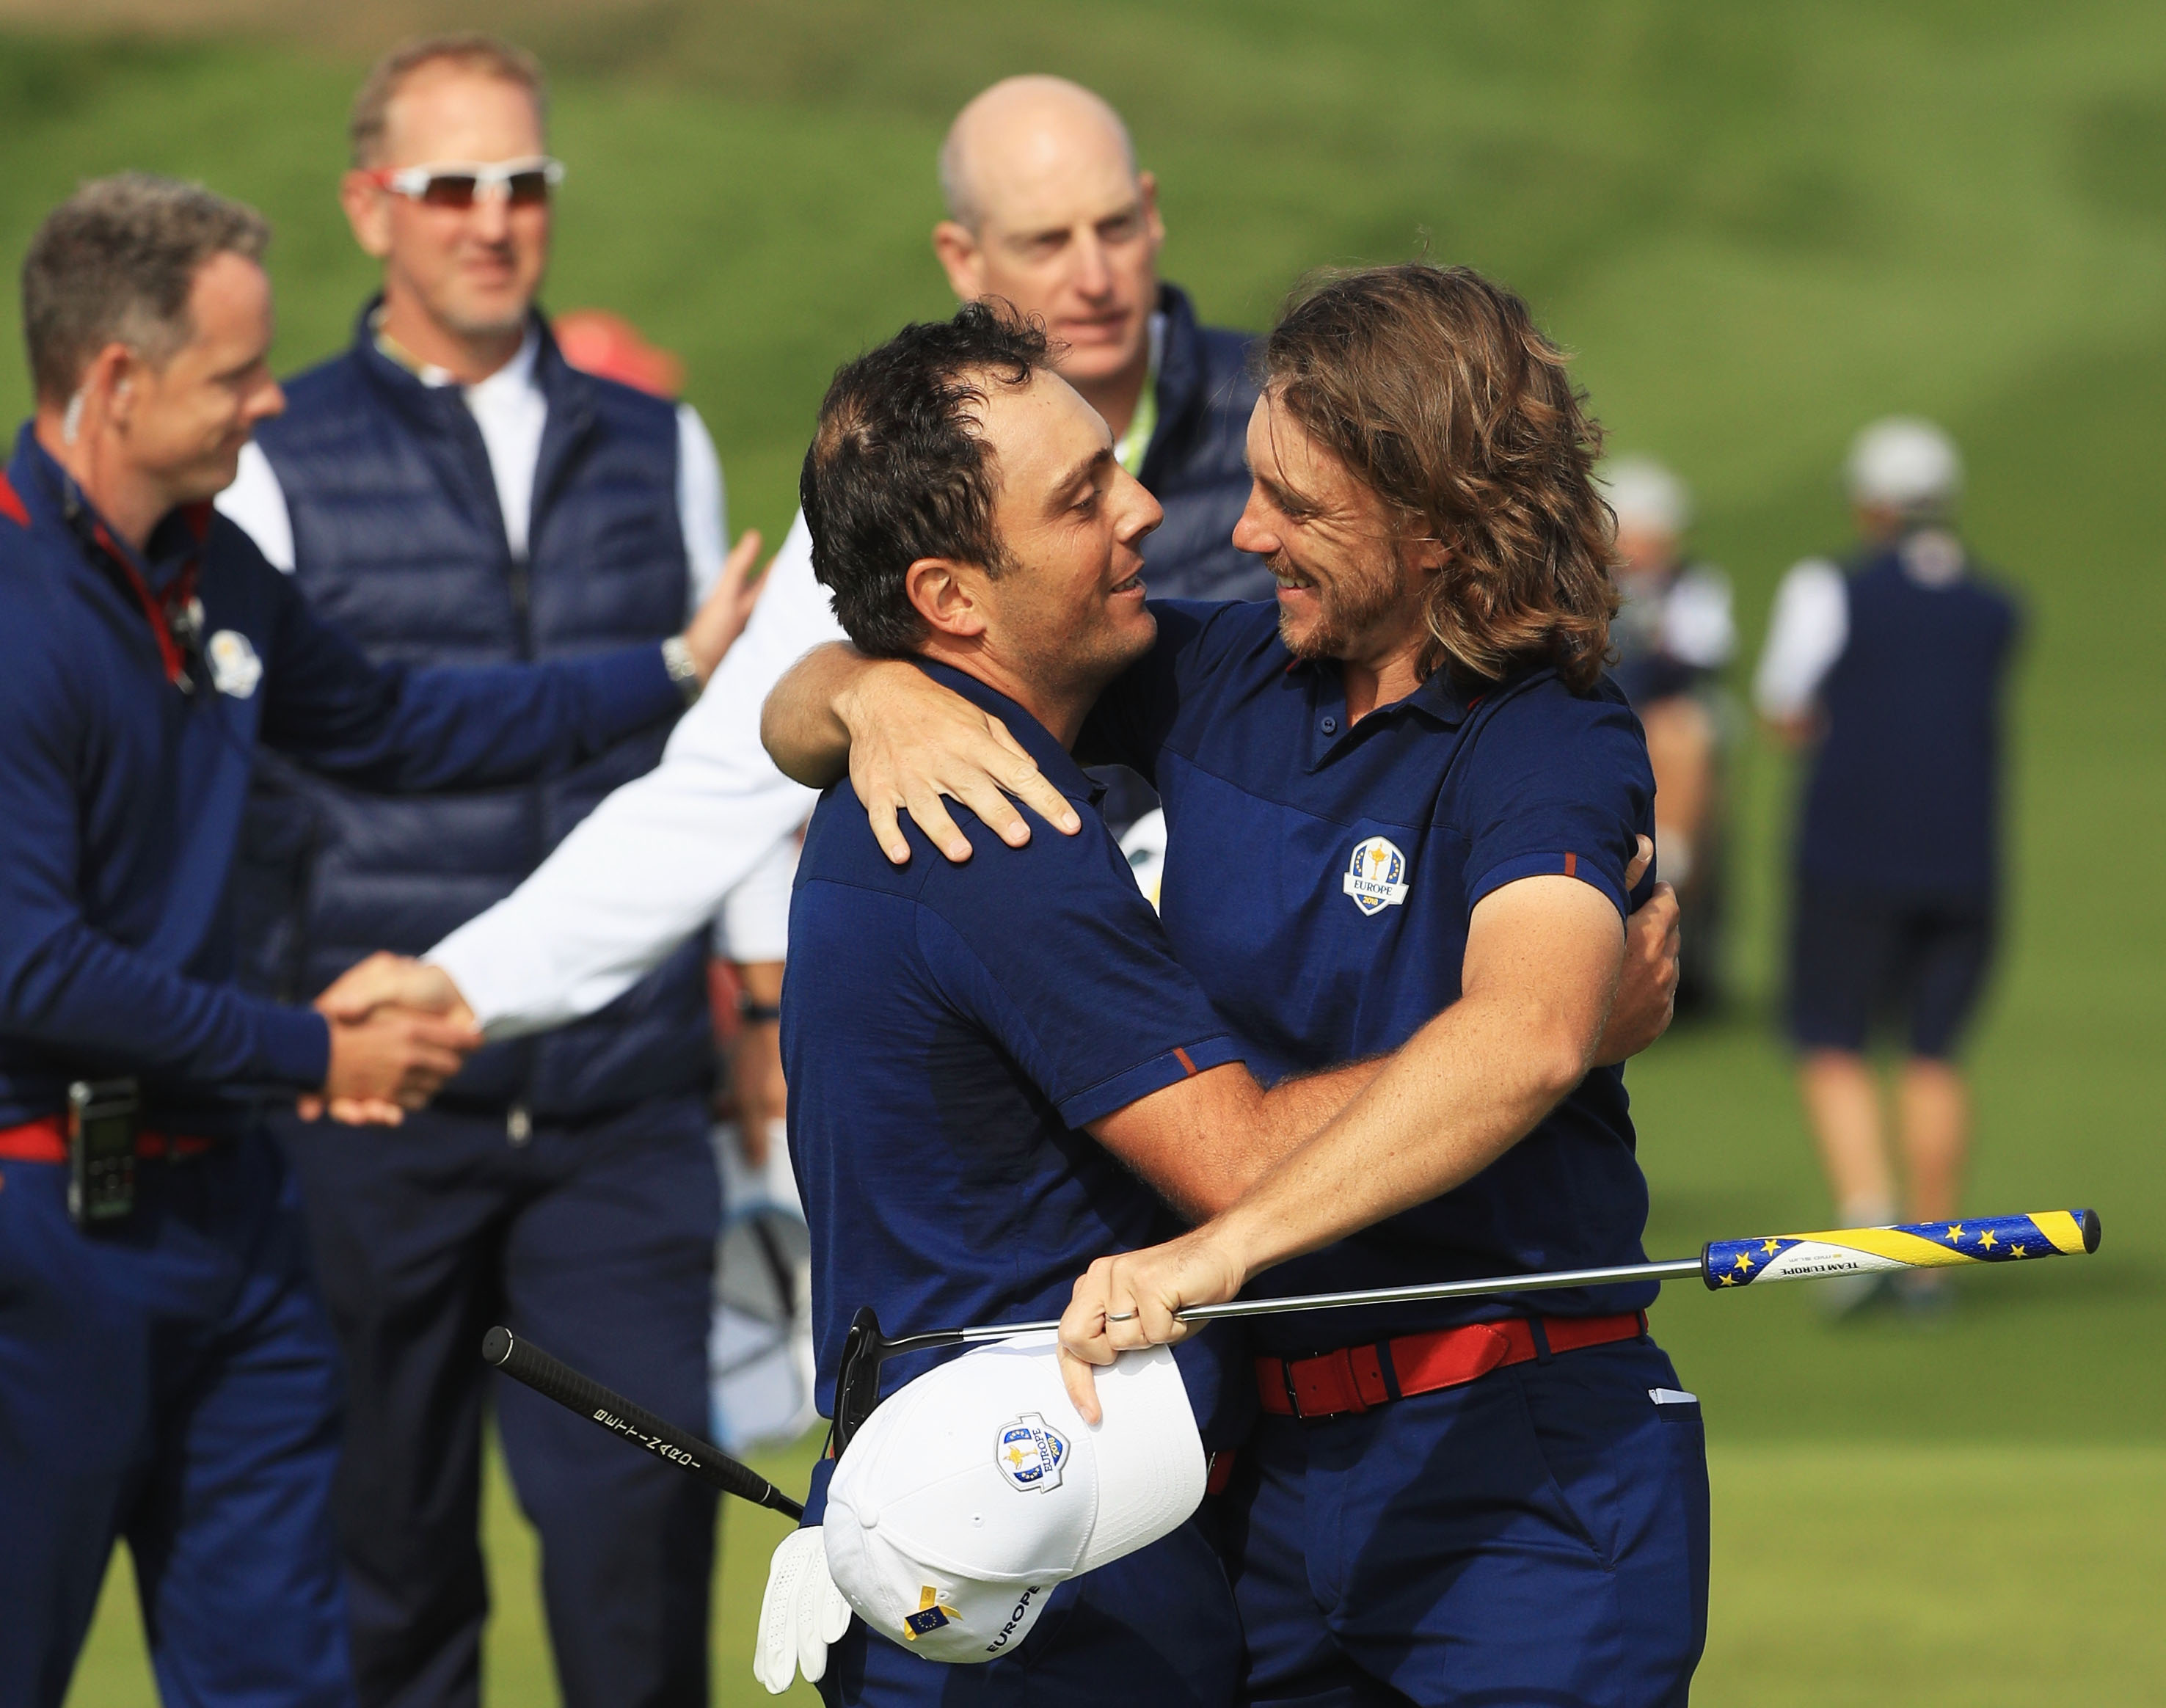 Europe seal 4-0 whitewash in Friday afternoon foursomes at Ryder Cup